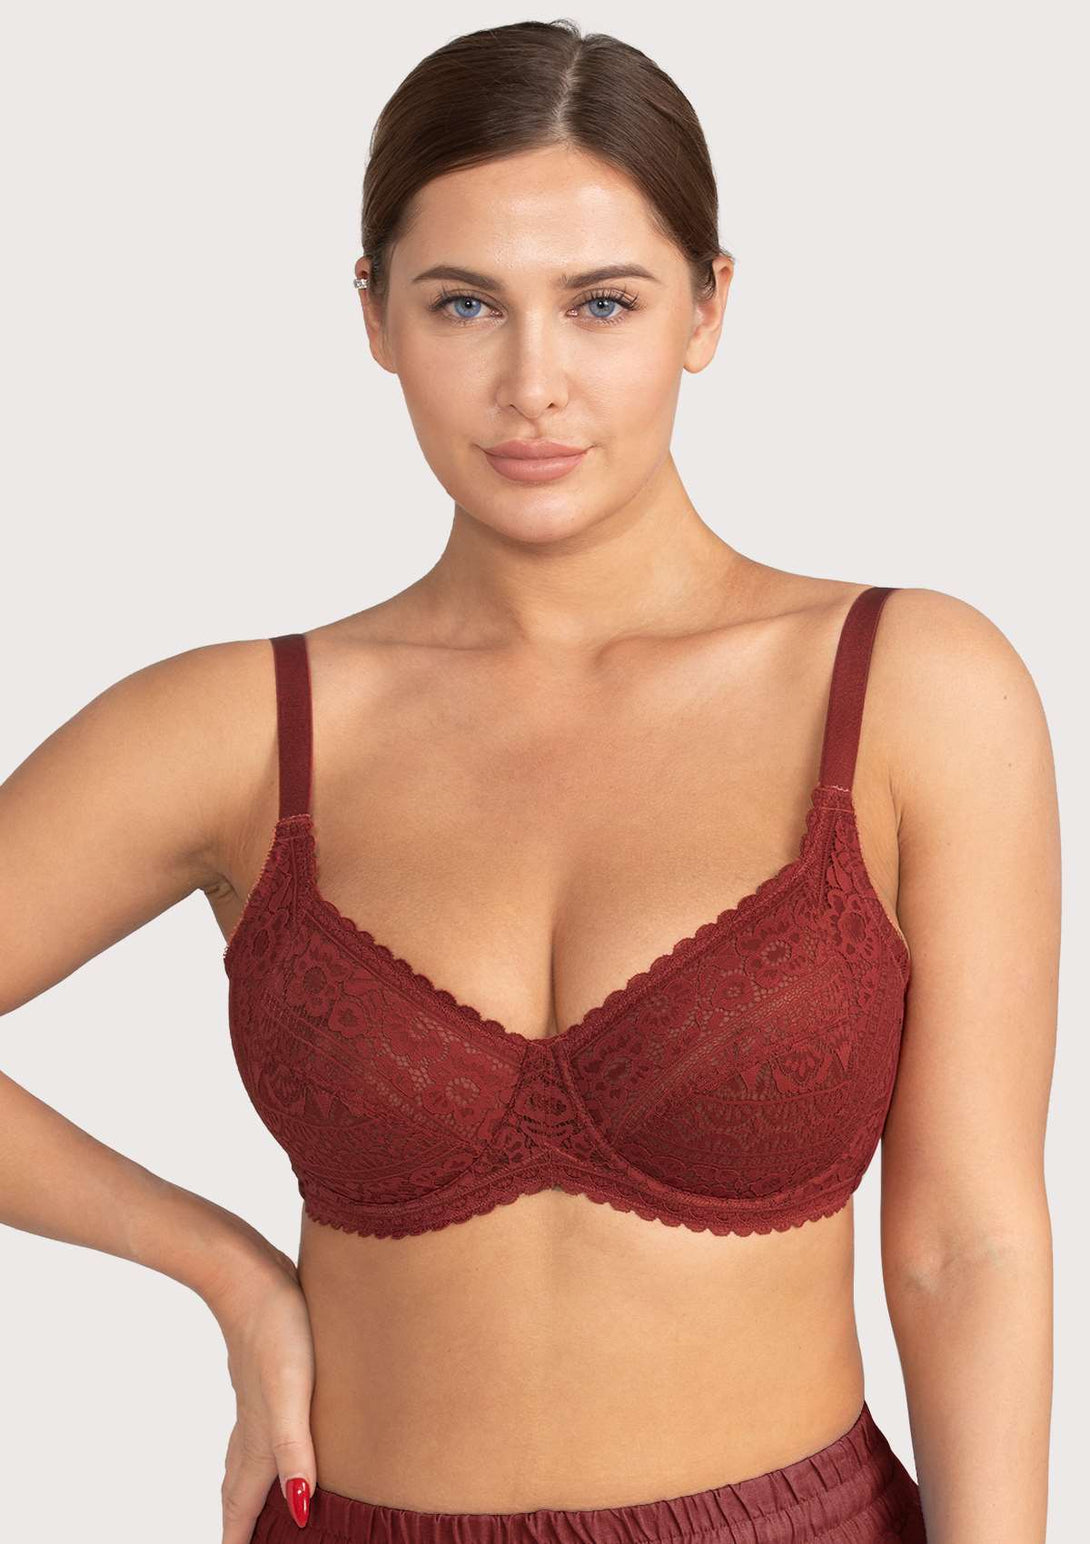 HSIA Full Coverage Lace Underwire Bra for Women with Malaysia